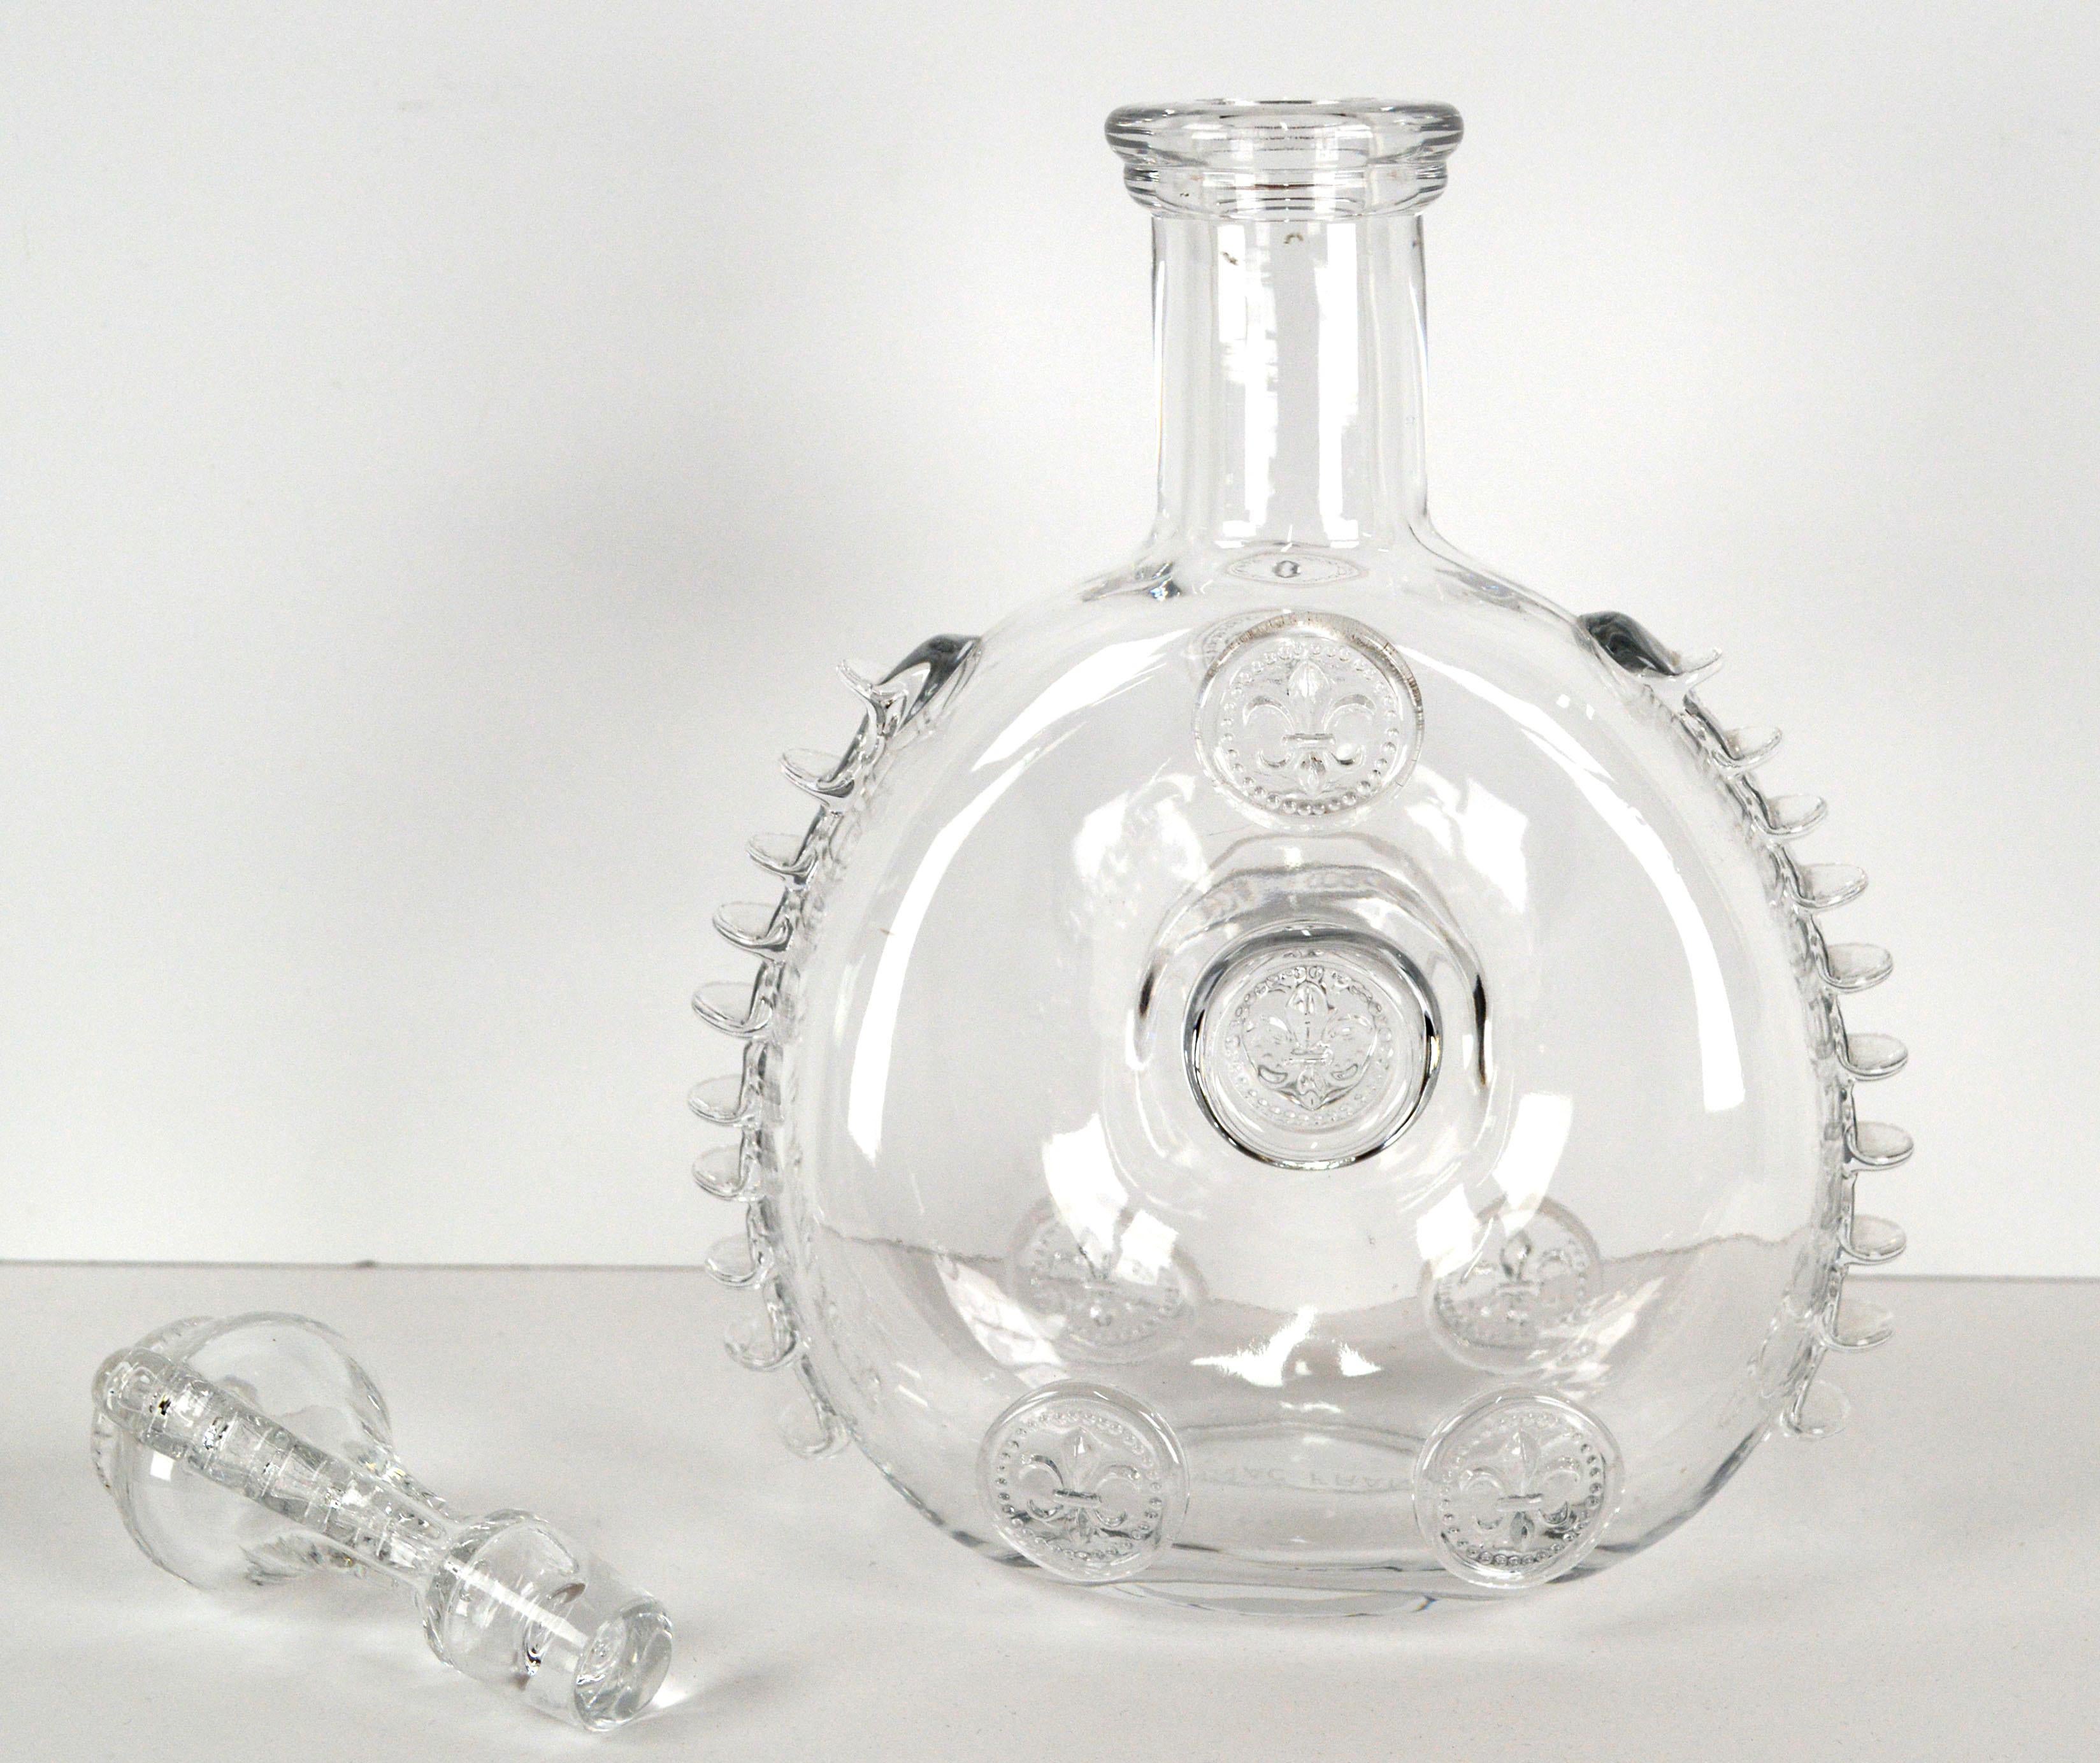 Elegant Remy Martin Baccarat crystal cognac decanter bottle with matching stopper, by fine crystal manufacturer Baccarat (French, founded 1764). The ornate stopper and fine details of ribbed spines along each side make this unique decanter an